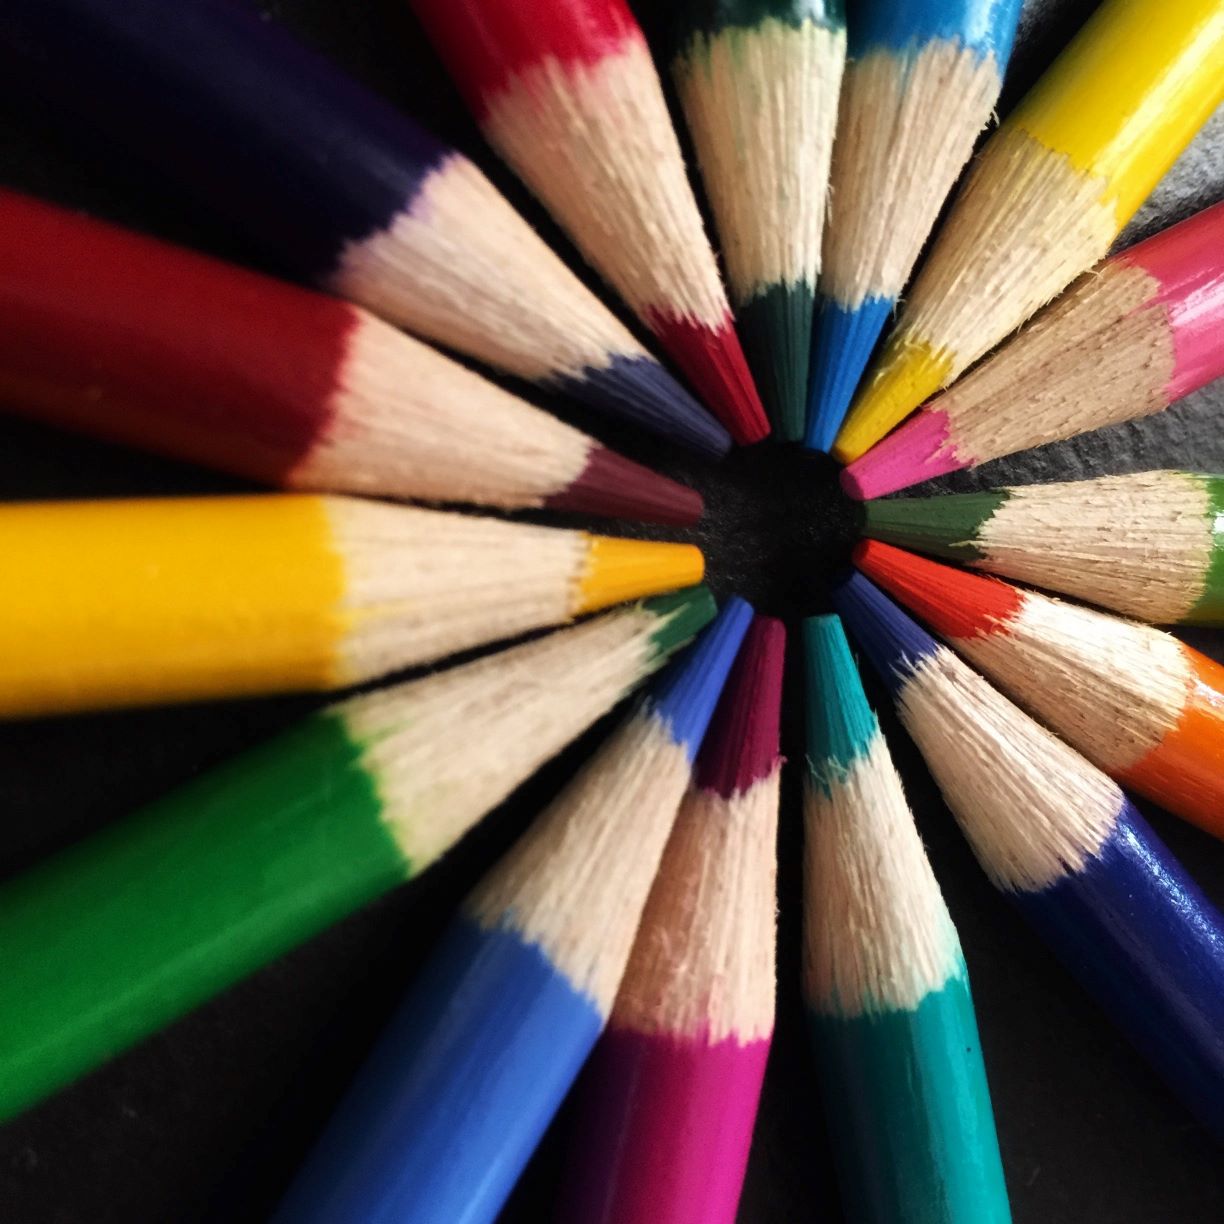 Brain health - Colorful Pencils in a rainbow of colors showing the pencil tips in a circle